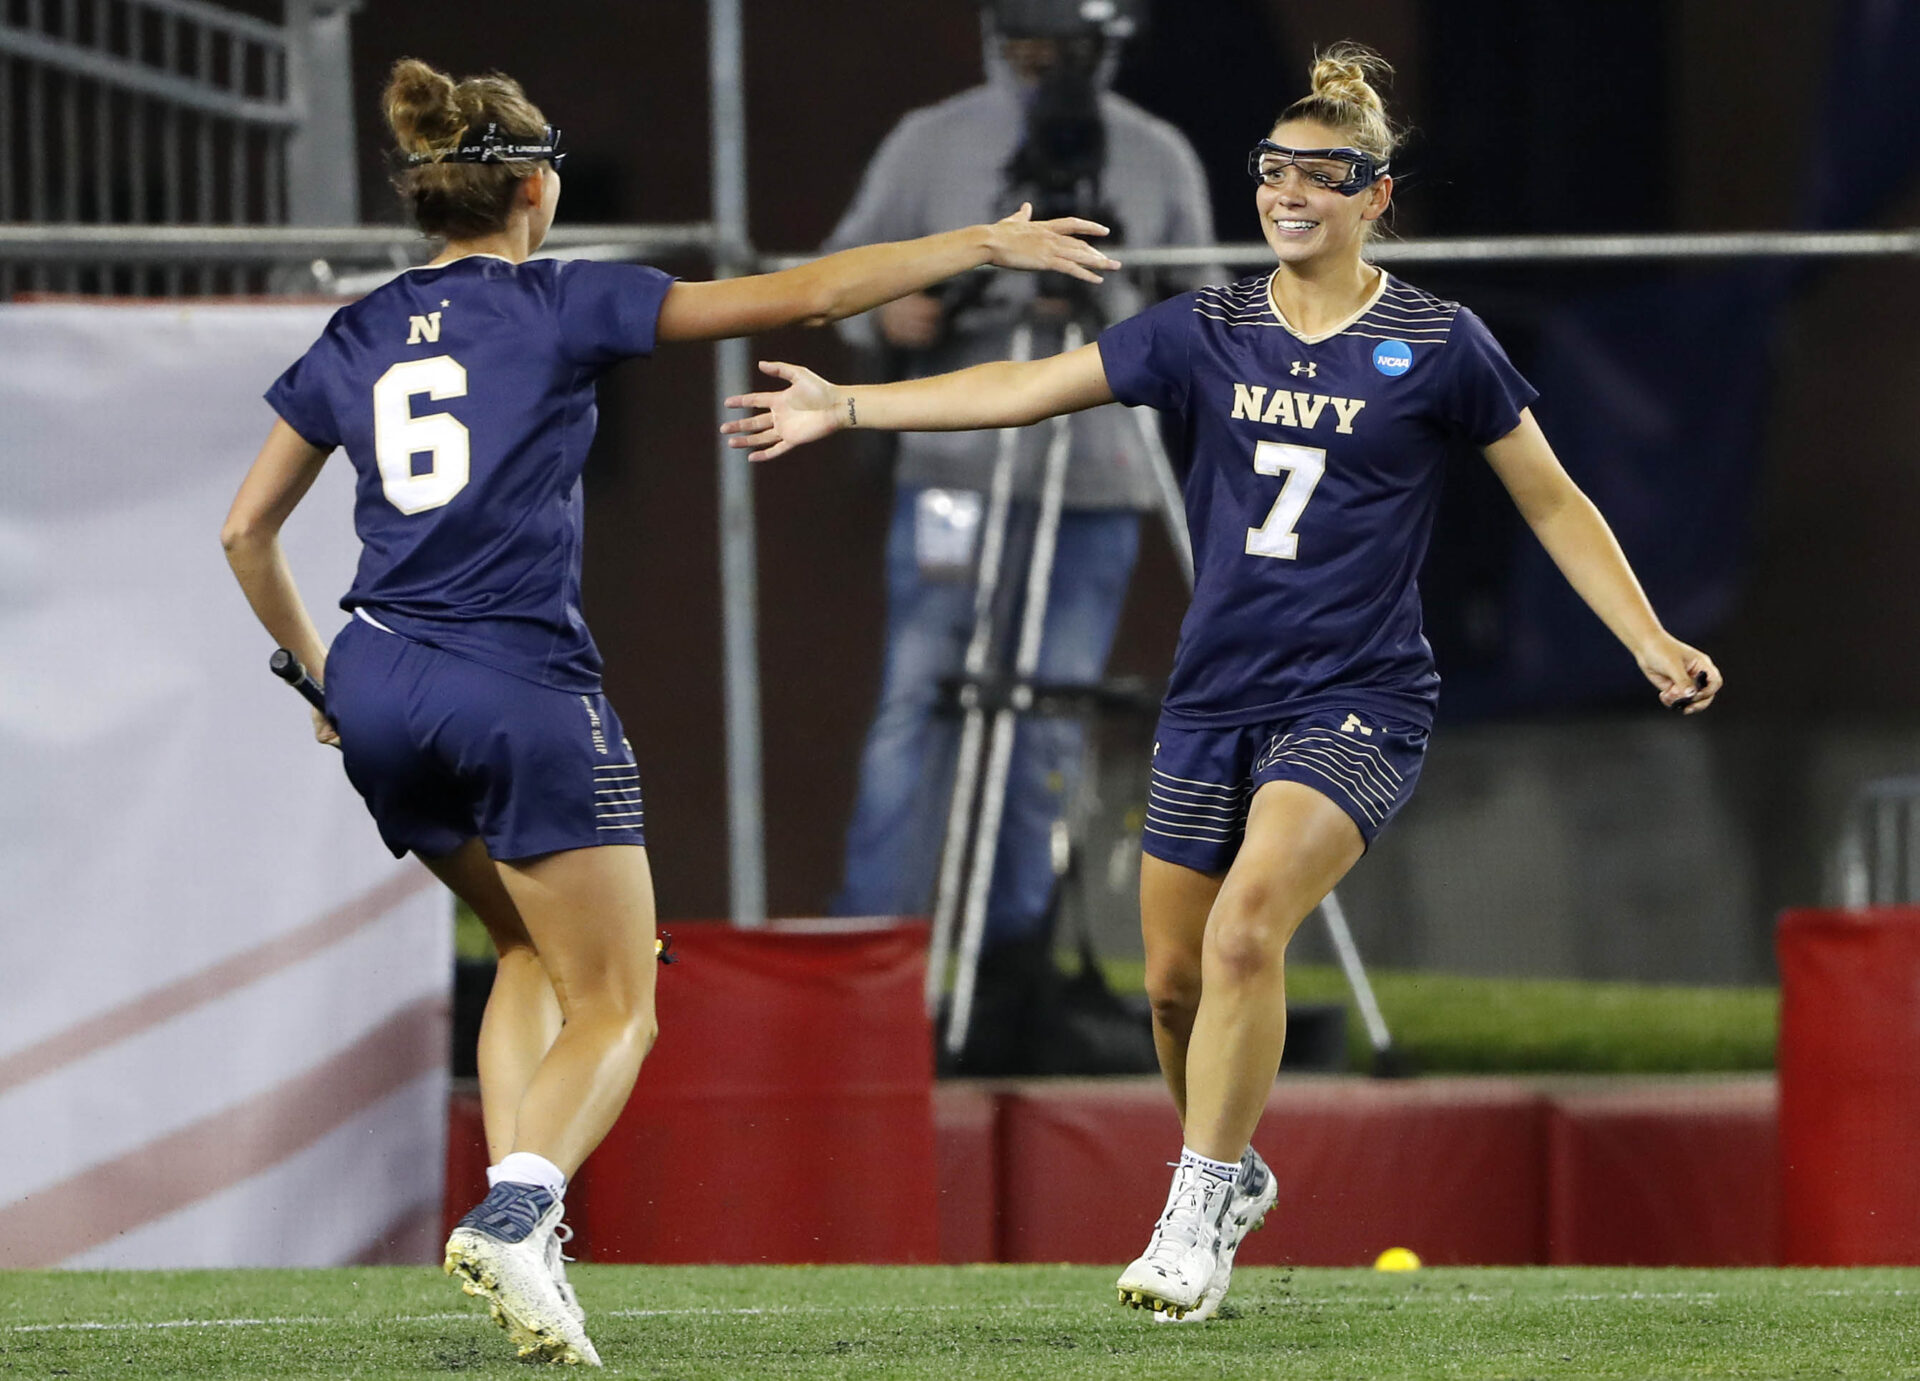 Naval Academy Women’s Lacrosse Team Sets The Internet On Fire [VIDEOS]